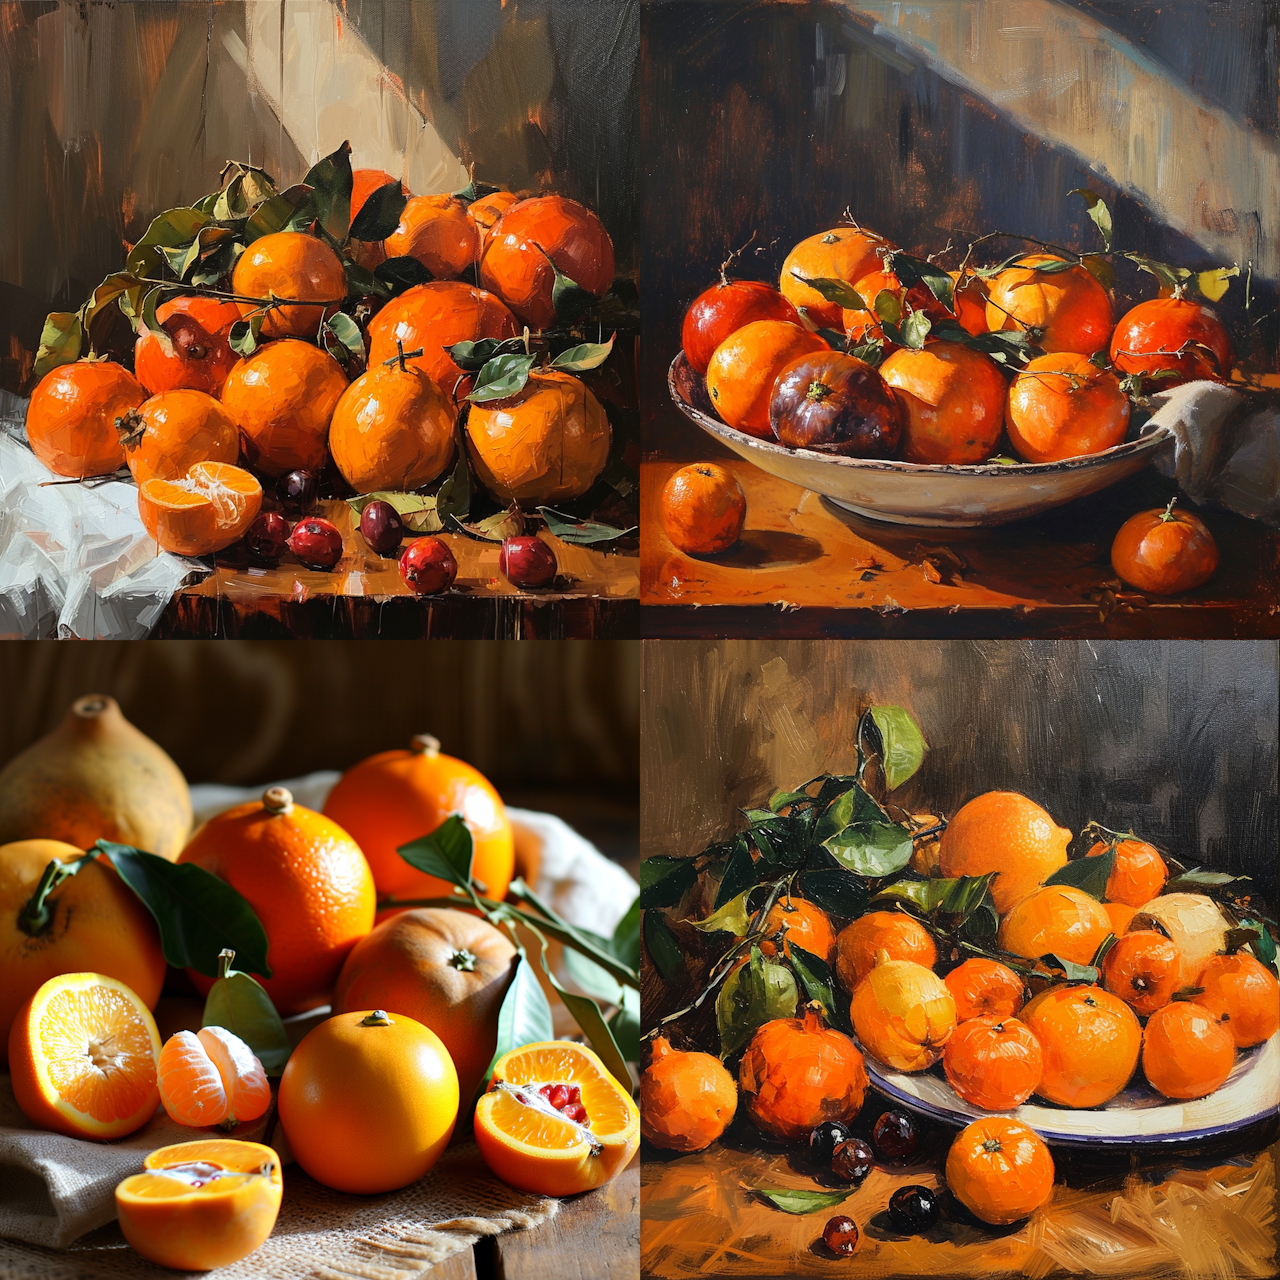 oranges and persimmons